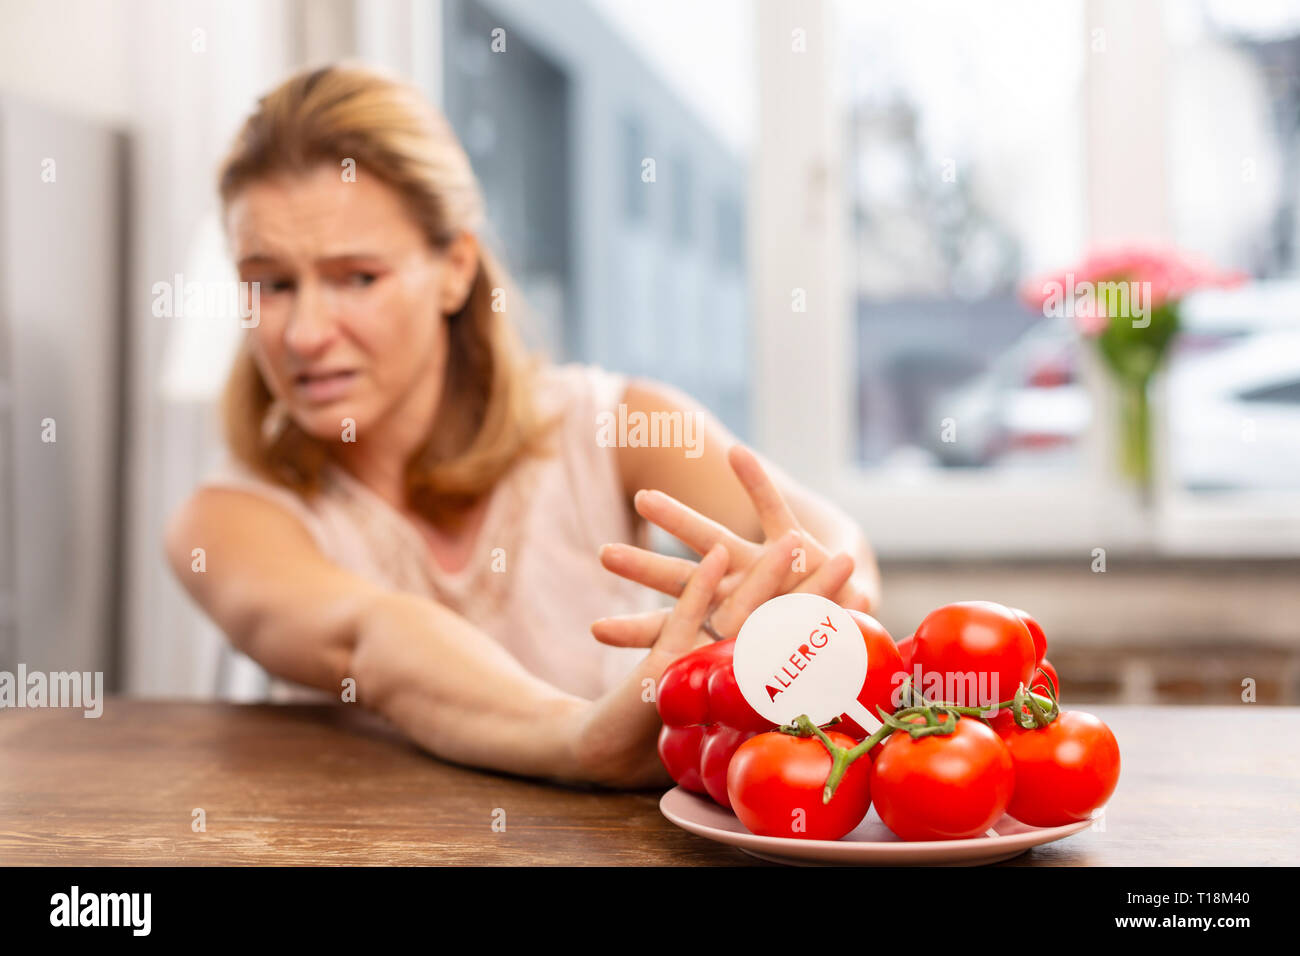 Woman with hypersensitivity to allergens not eating tomatoes Stock Photo